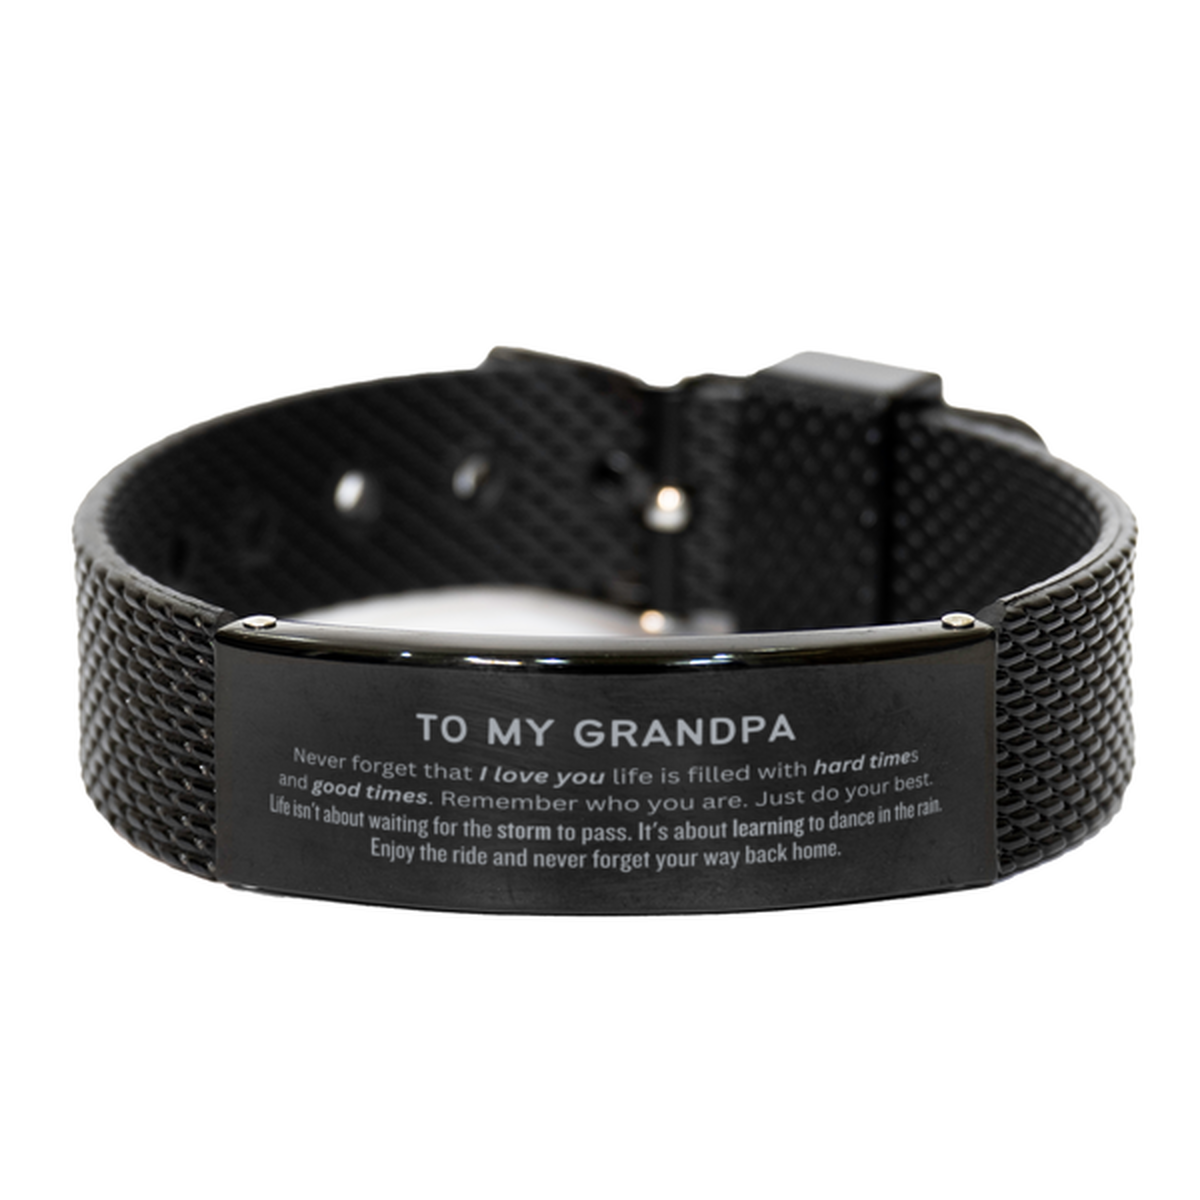 Christmas Grandpa Black Shark Mesh Bracelet Gifts, To My Grandpa Birthday Thank You Gifts For Grandpa, Graduation Unique Gifts For Grandpa To My Grandpa Never forget that I love you life is filled with hard times and good times. Remember who you are. Just